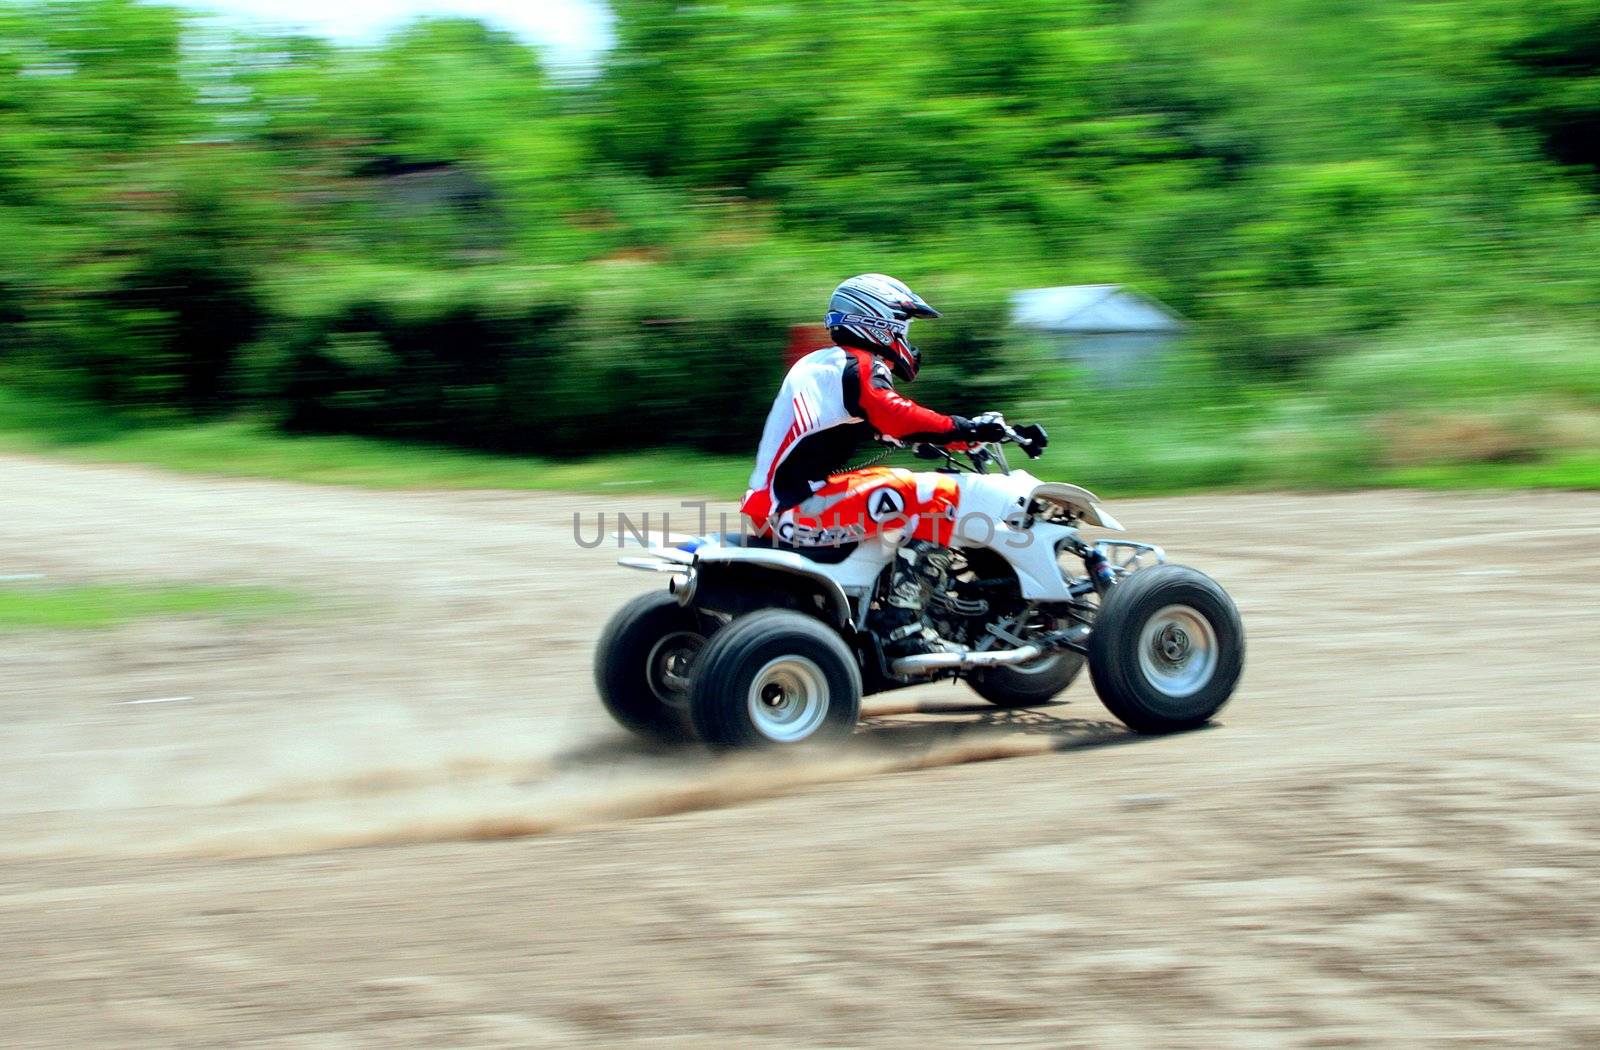 Man on quad bike during a race